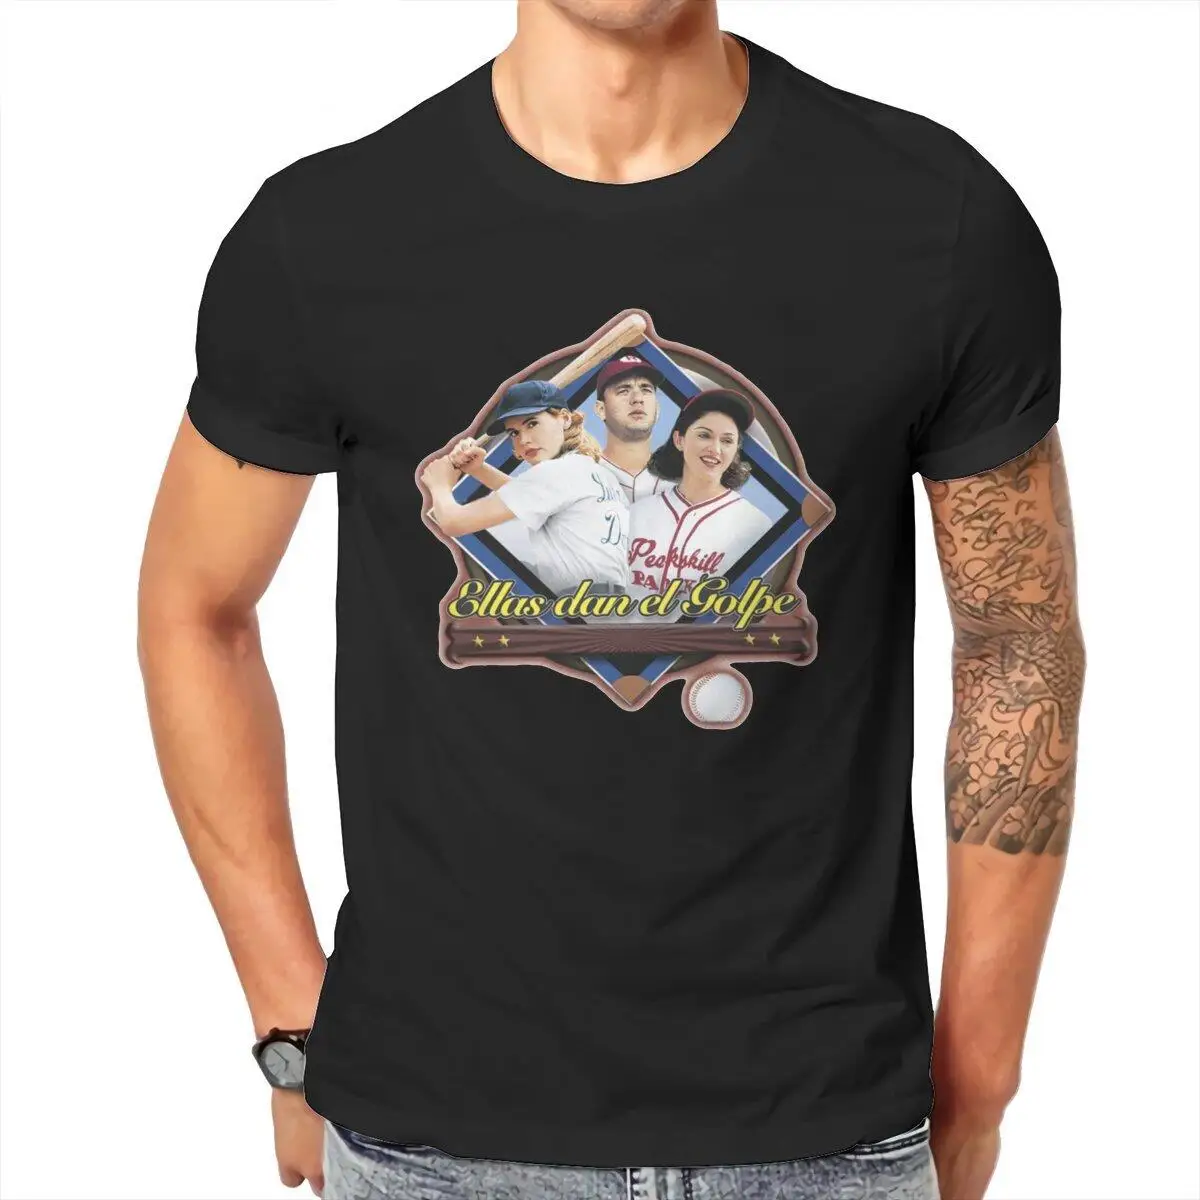 A League of Their Own  Men T Shirts Comedy Baseball Movie Funny Tee Shirt Round Collar T-Shirts 100% Cotton Gift Idea Tops